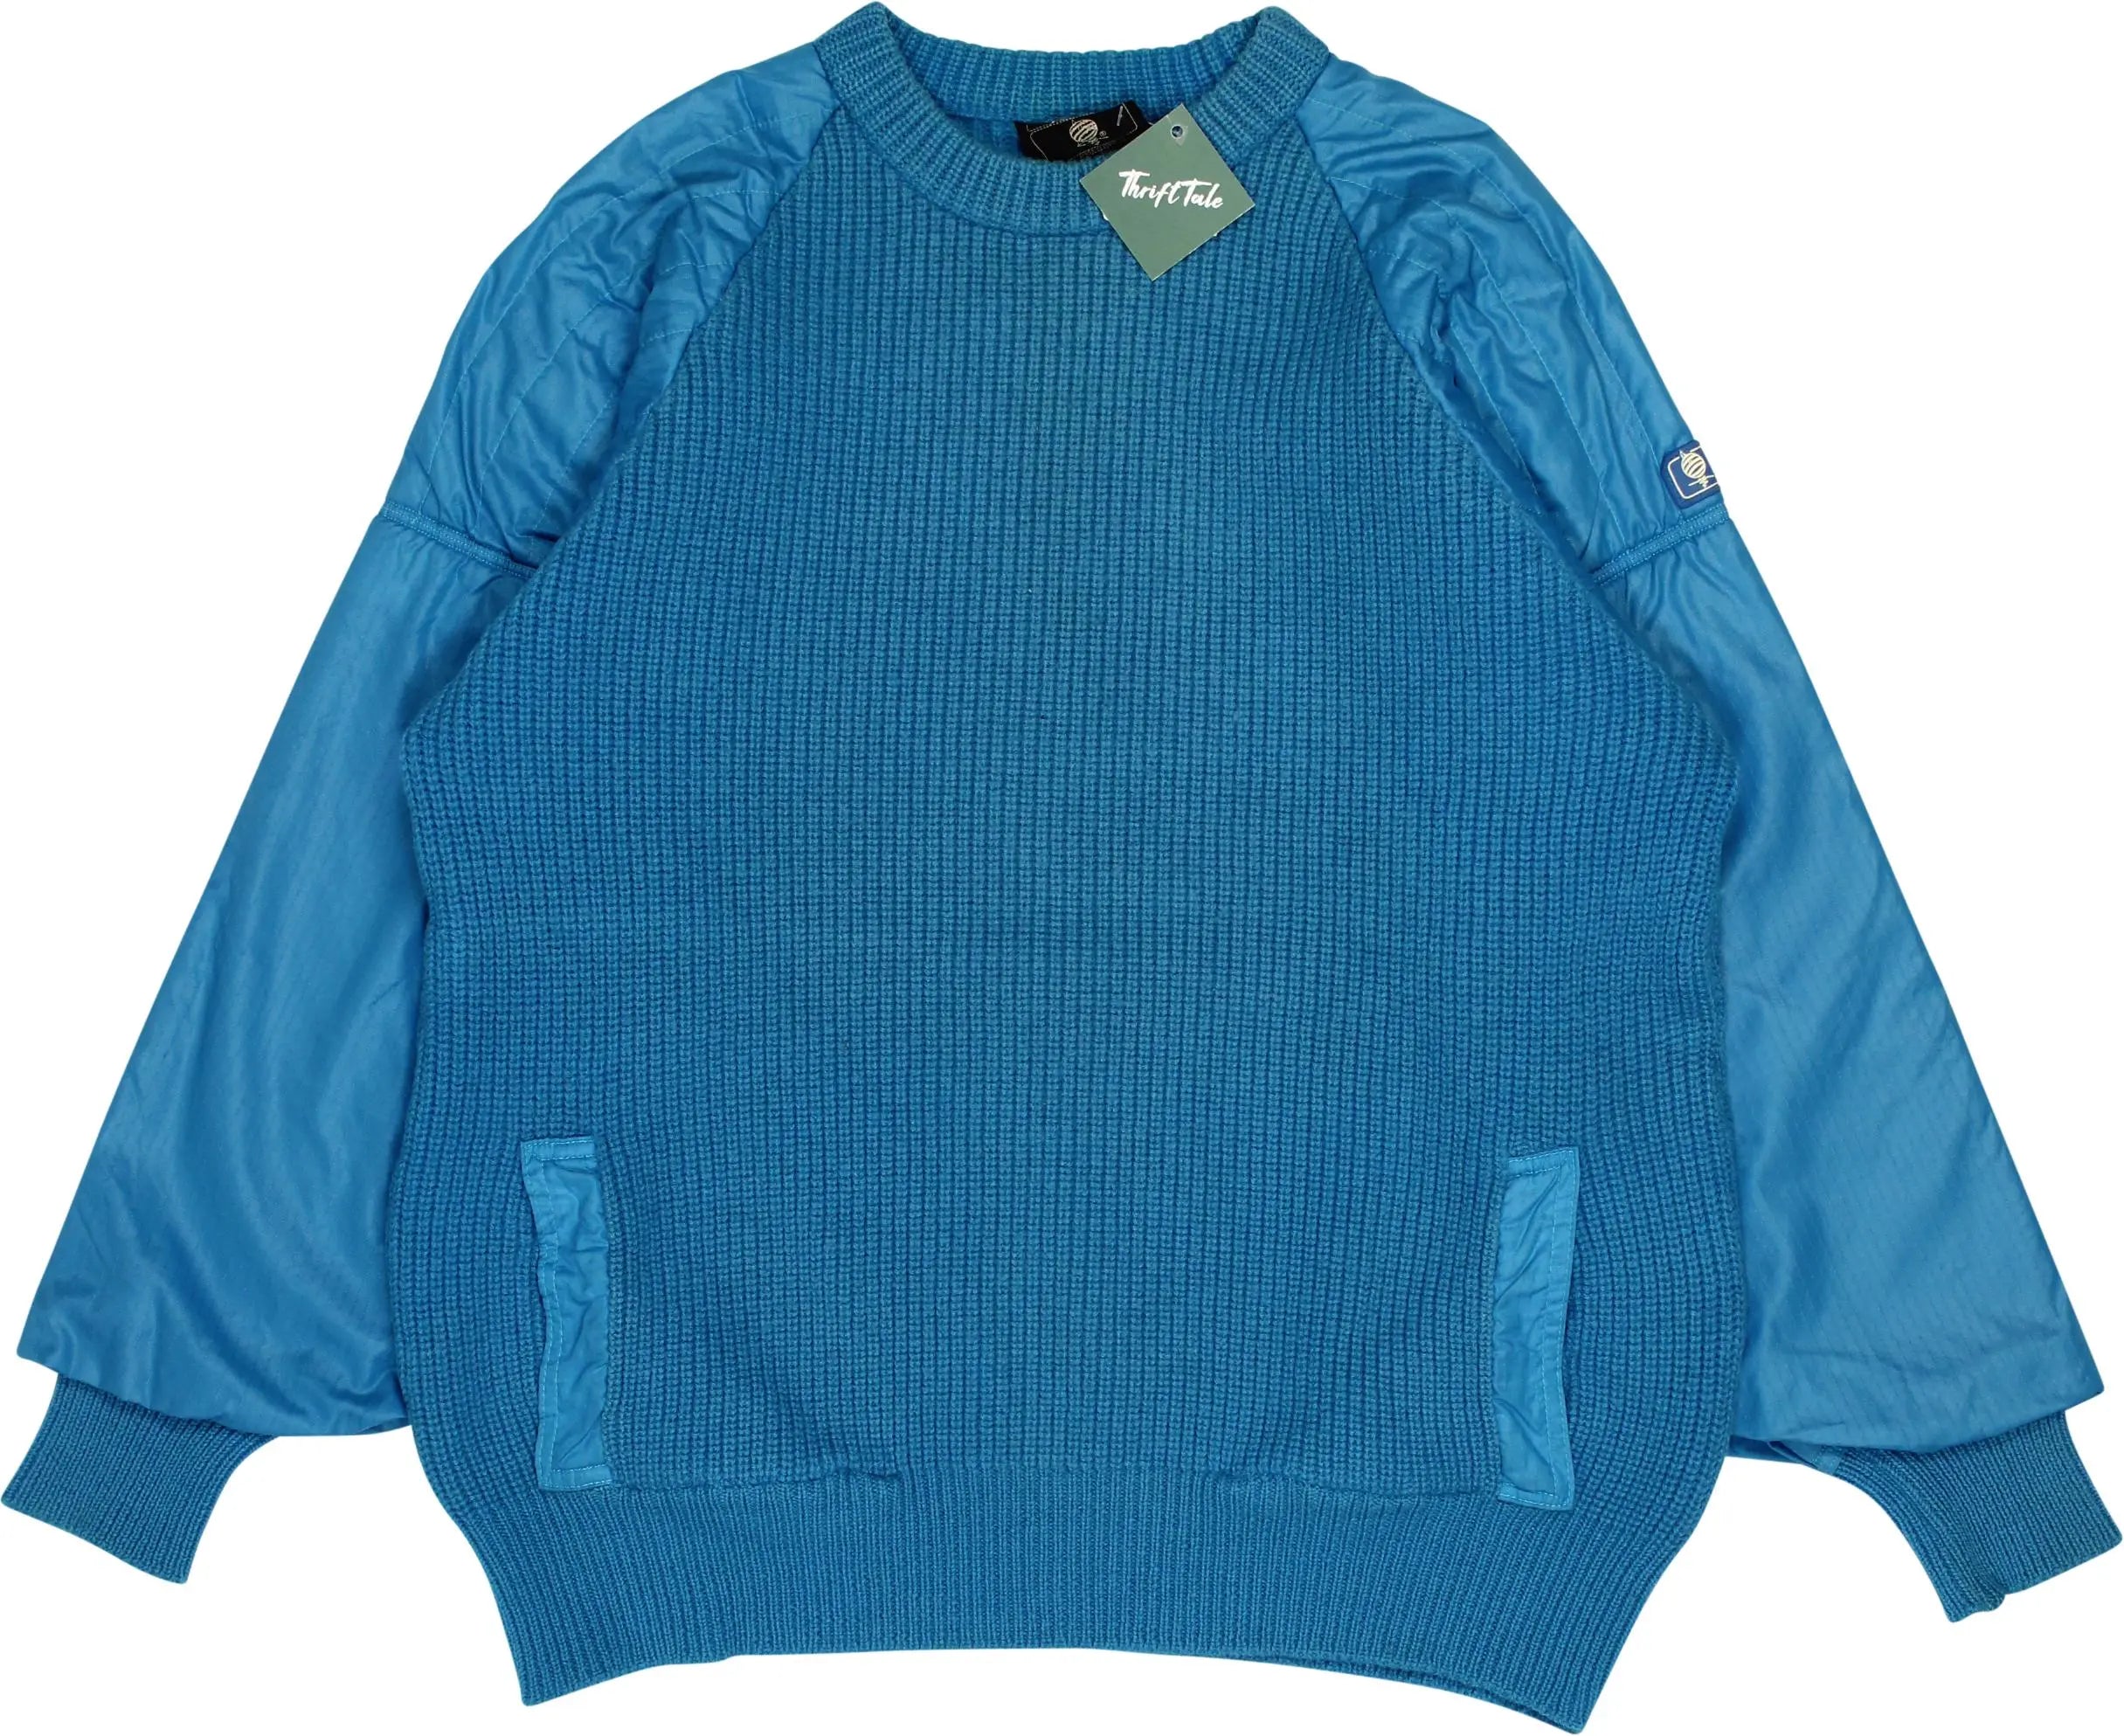 Marina Yachting - Blue Jumper by Marine Yachting- ThriftTale.com - Vintage and second handclothing